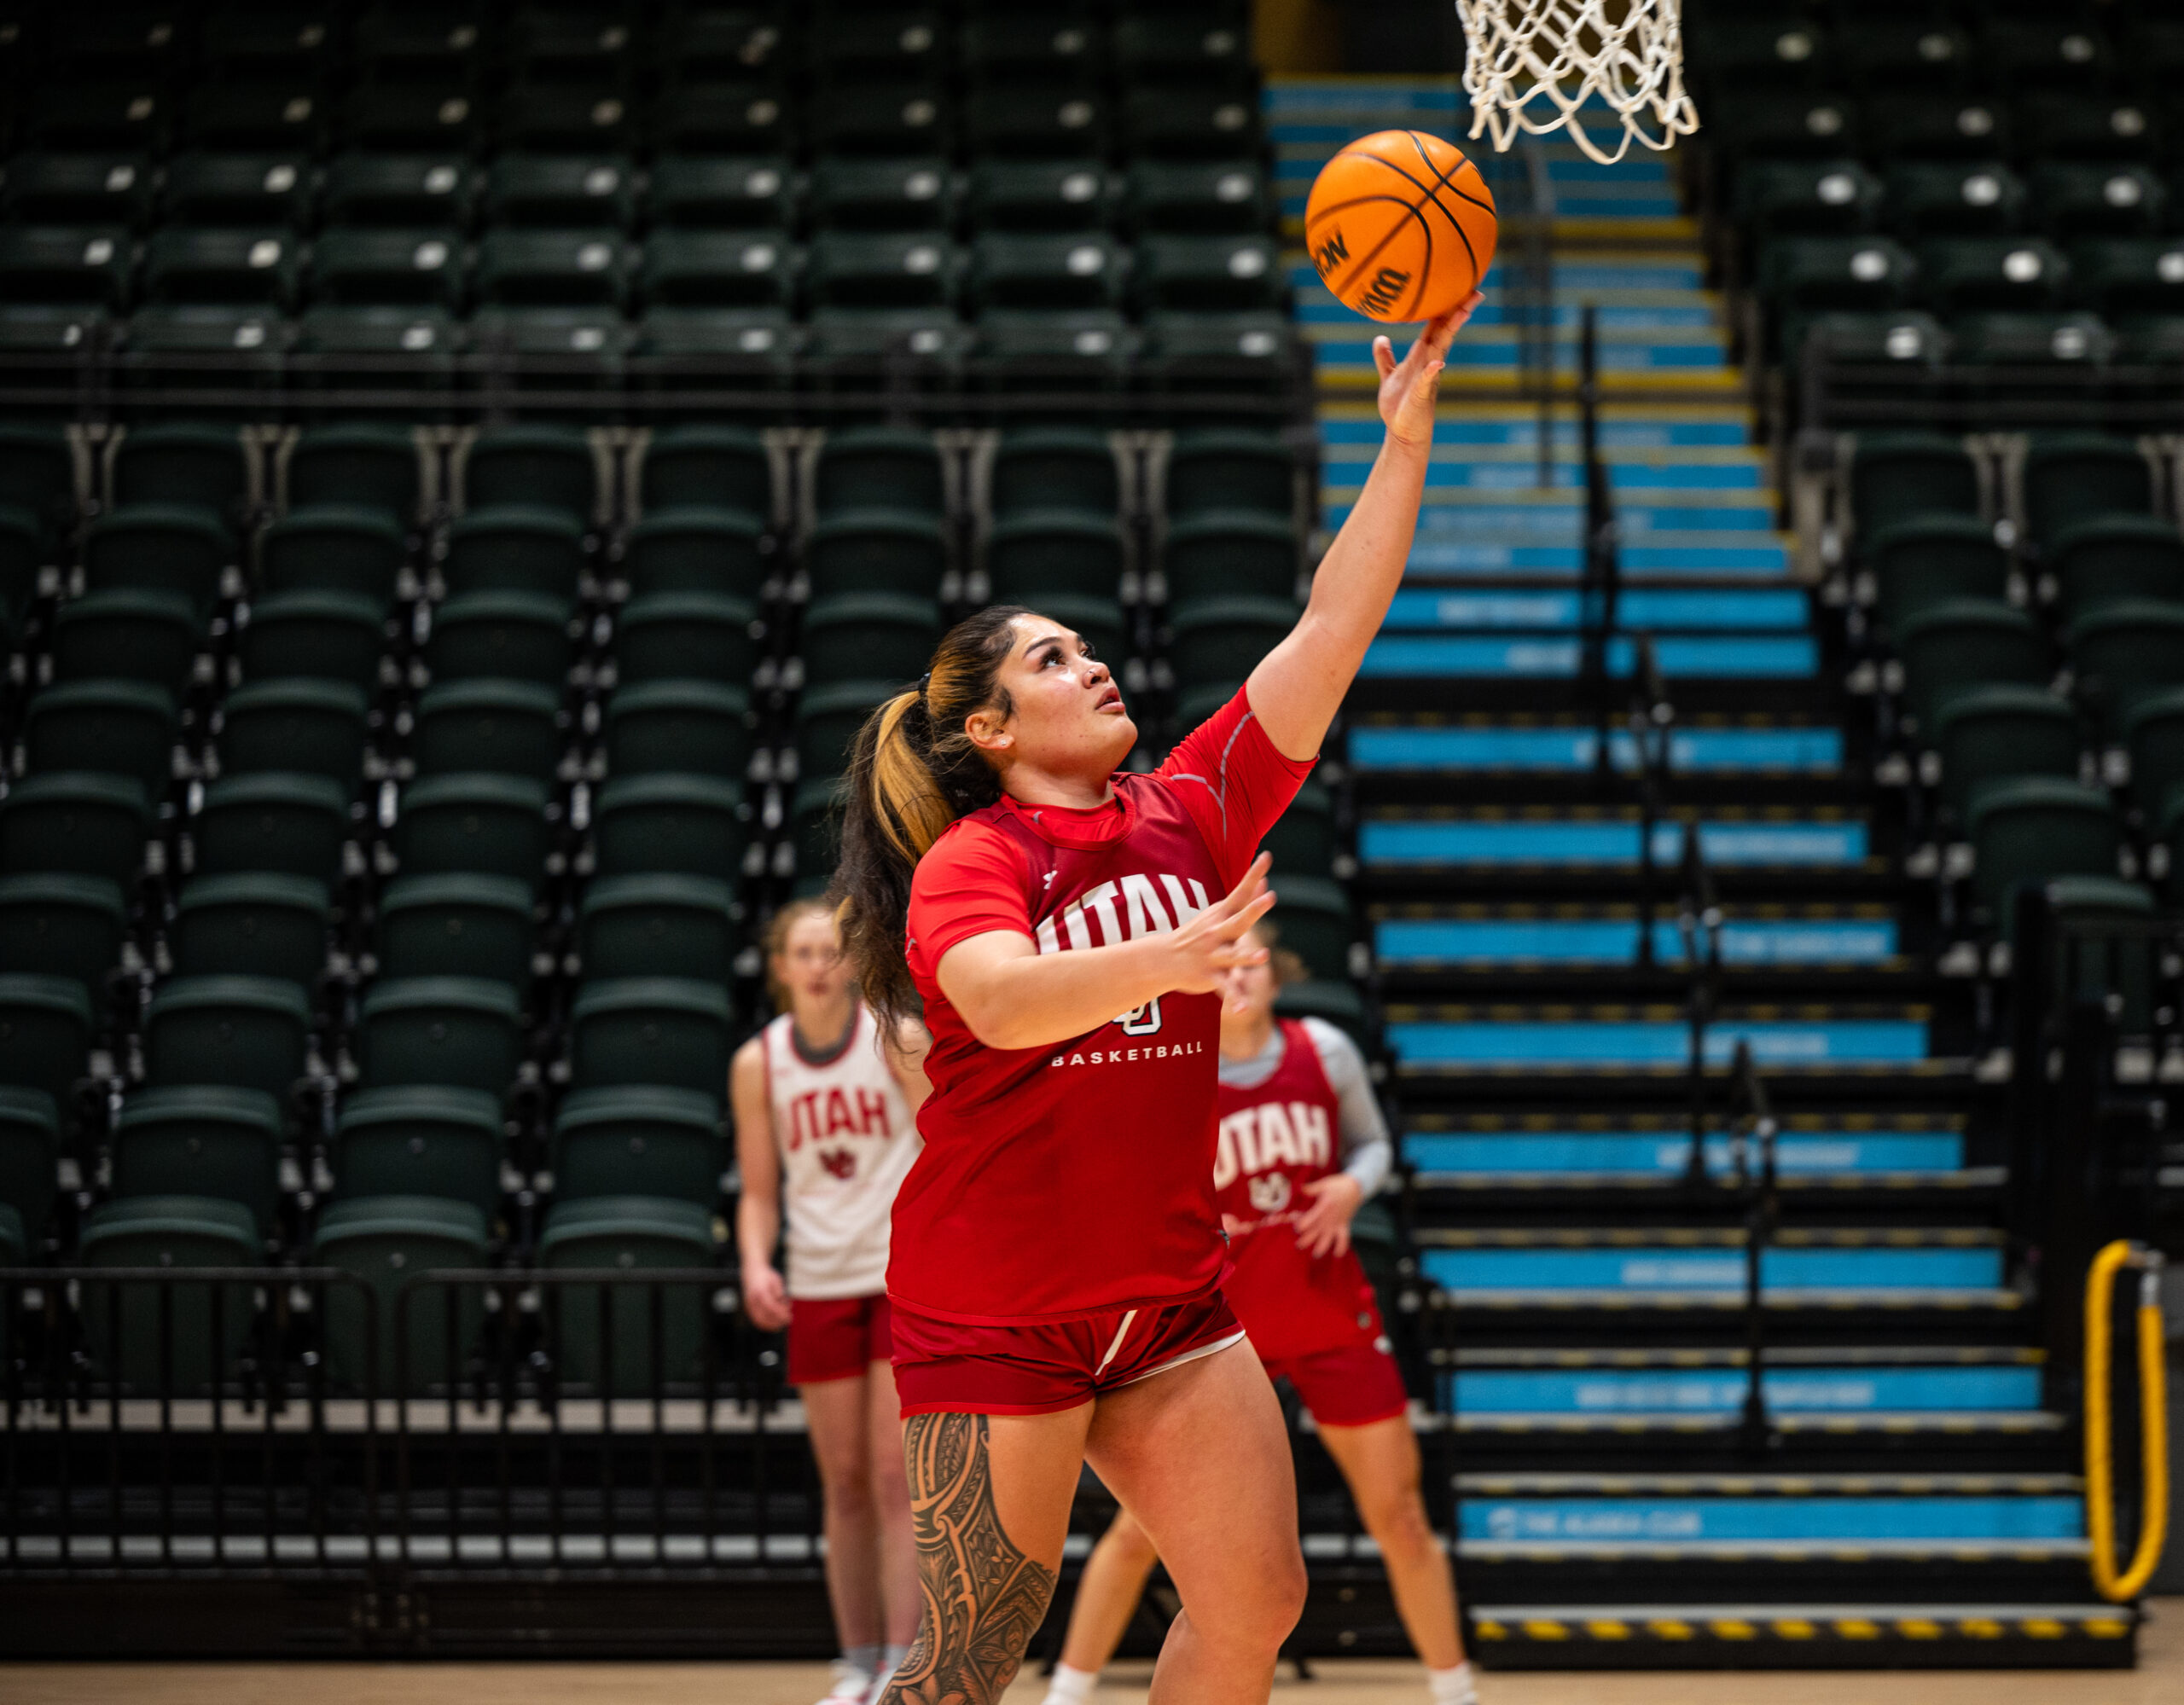 A woman in red short throws a basketball.